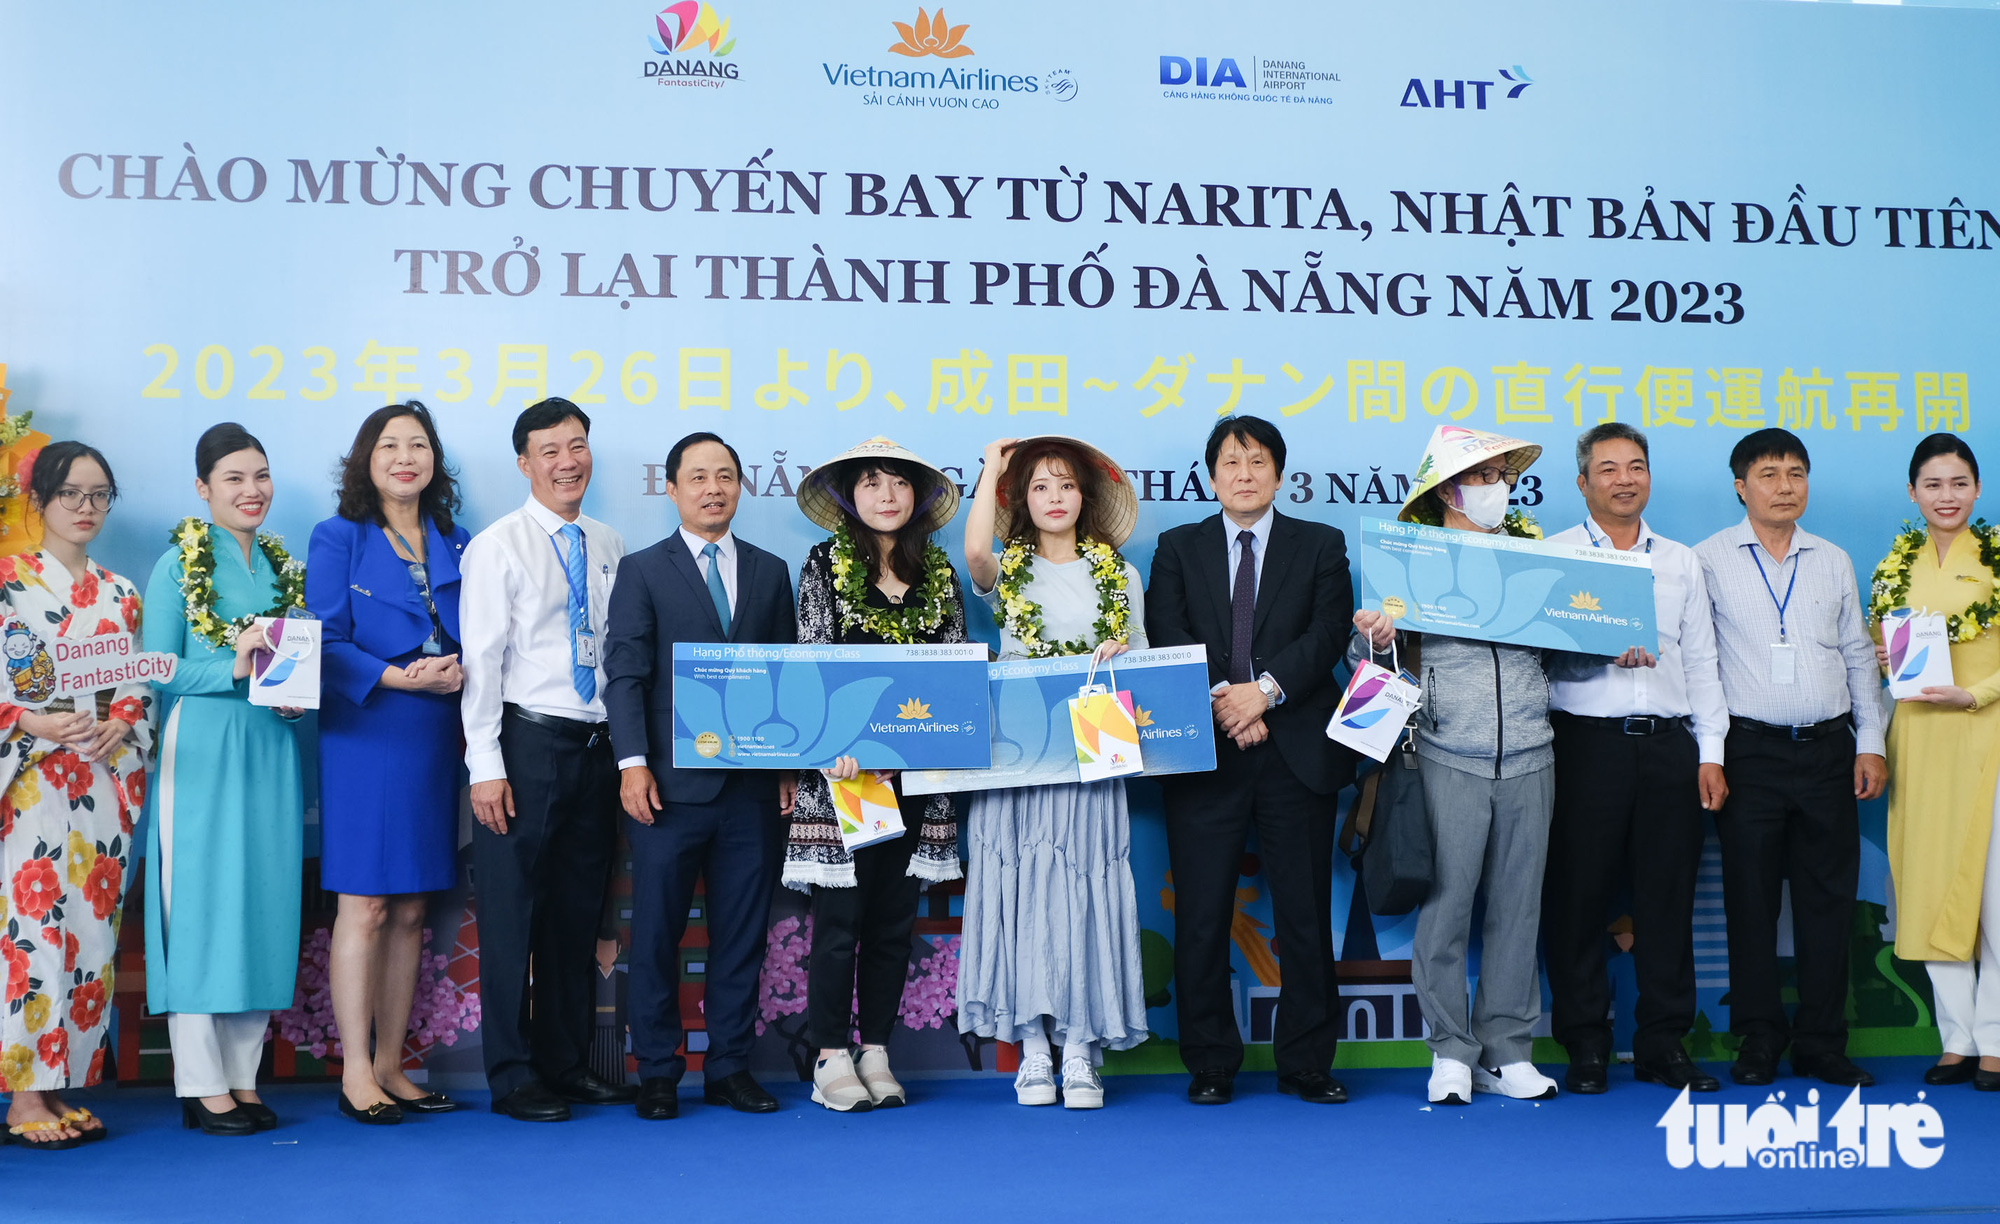 The three luckiest passengers of the flight receive return air tickets from Vietnam Airlines. Photo: Tan Luc / Tuoi Tre